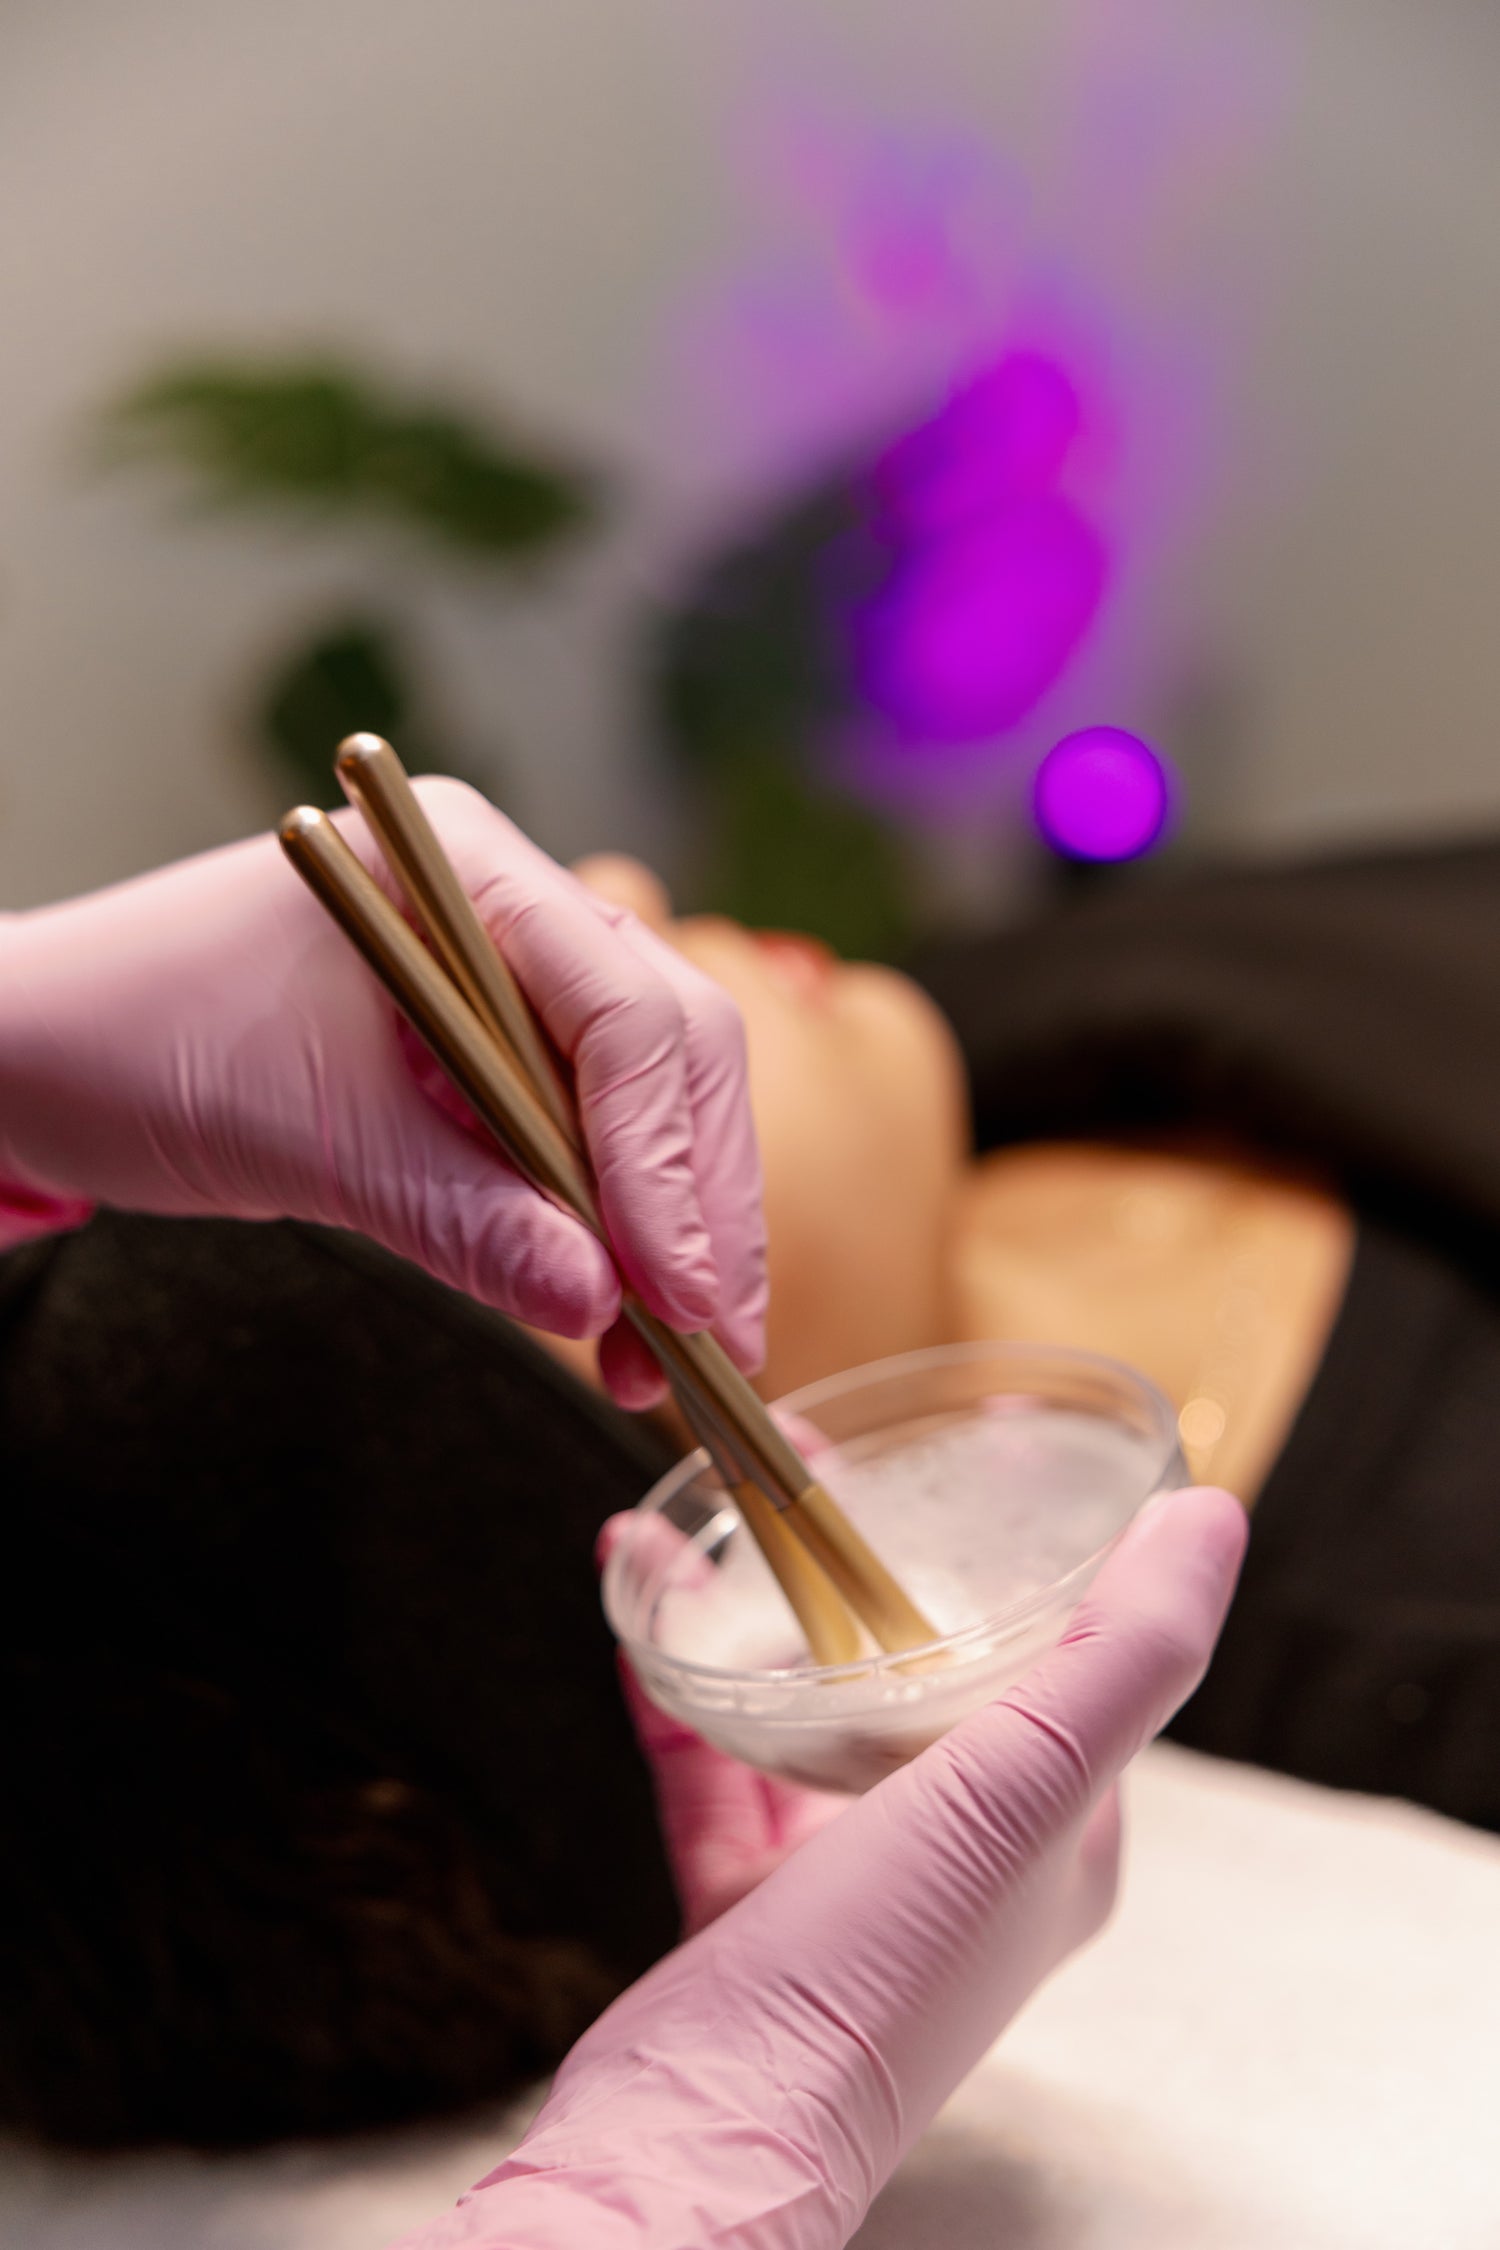 REVIVE YOUR RADIANCE WITH OUR LUXURIOUS FACIALS